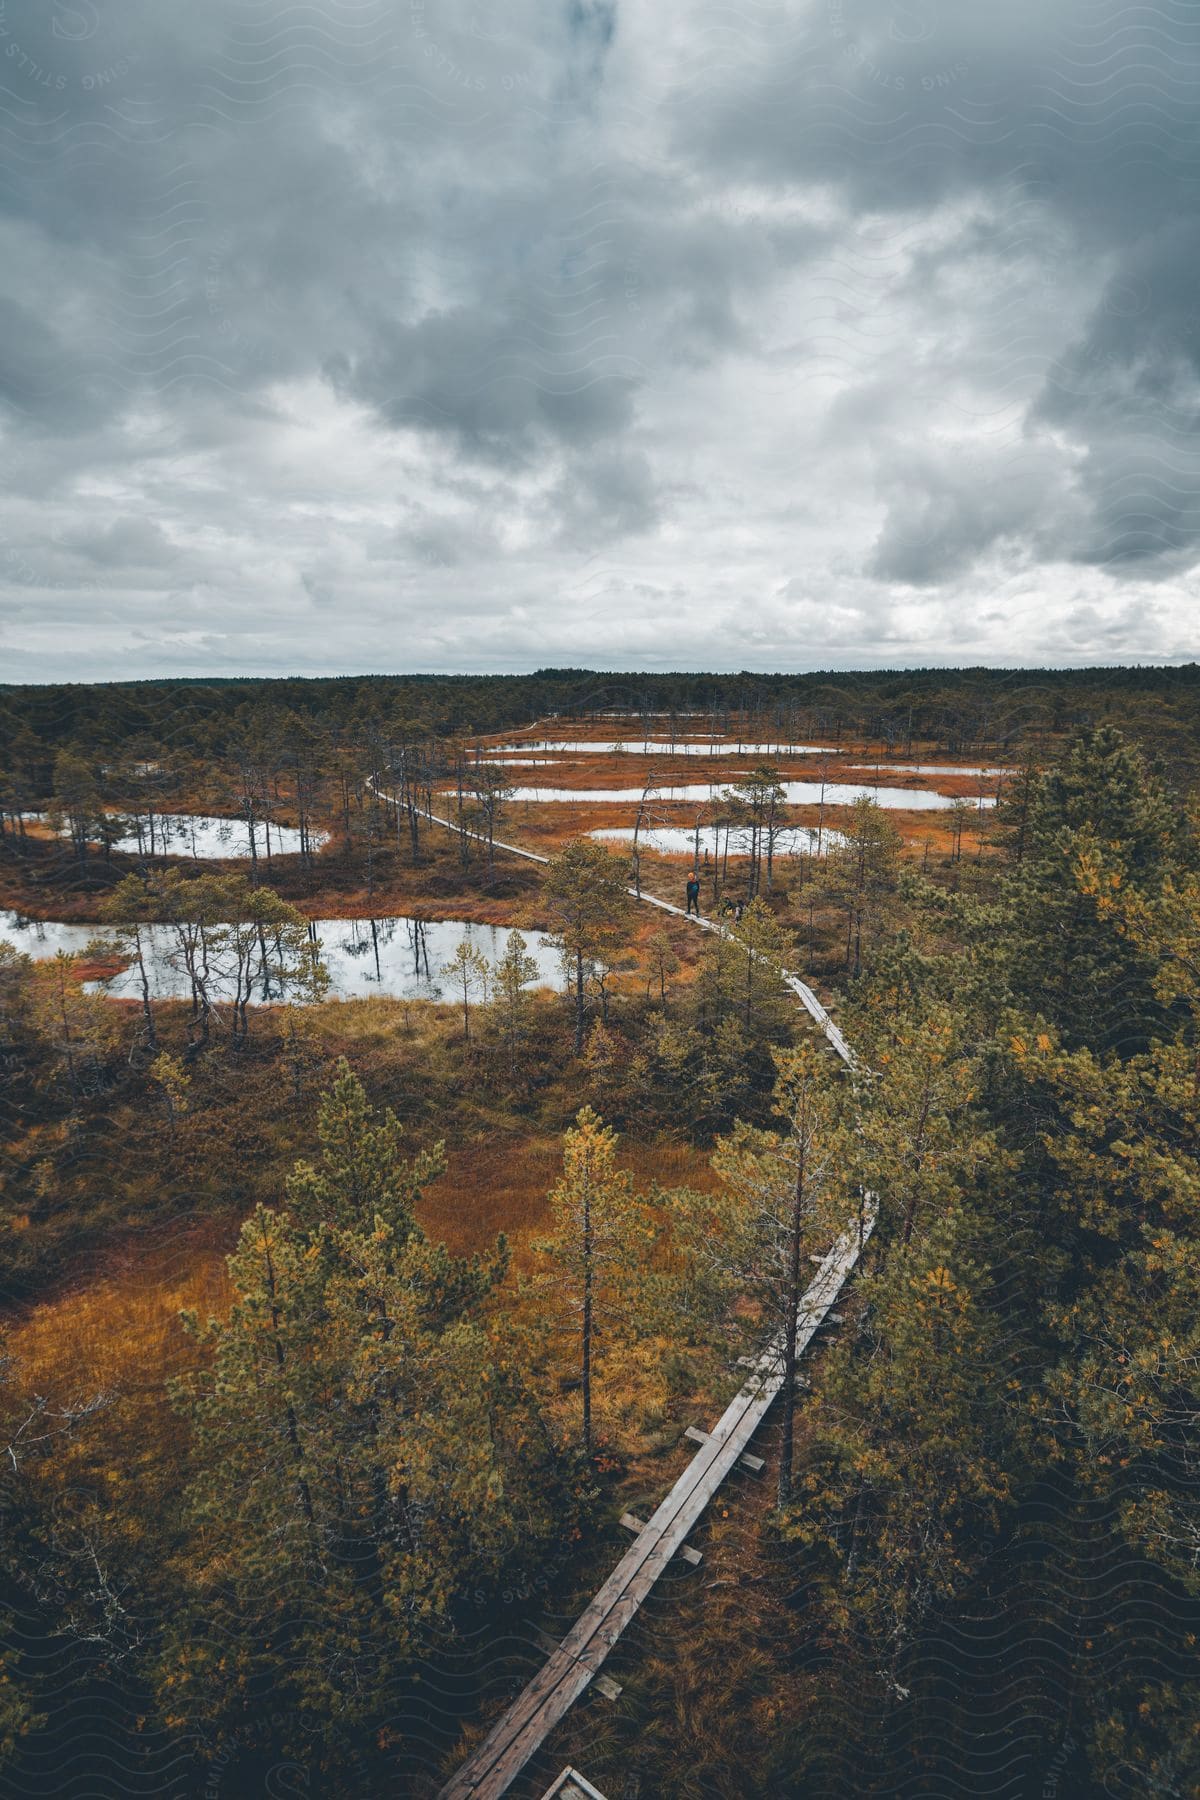 Aerial view of kemeri national park in latvia showing the wooden footpath extending over the kemeri great swamp wetland landscape